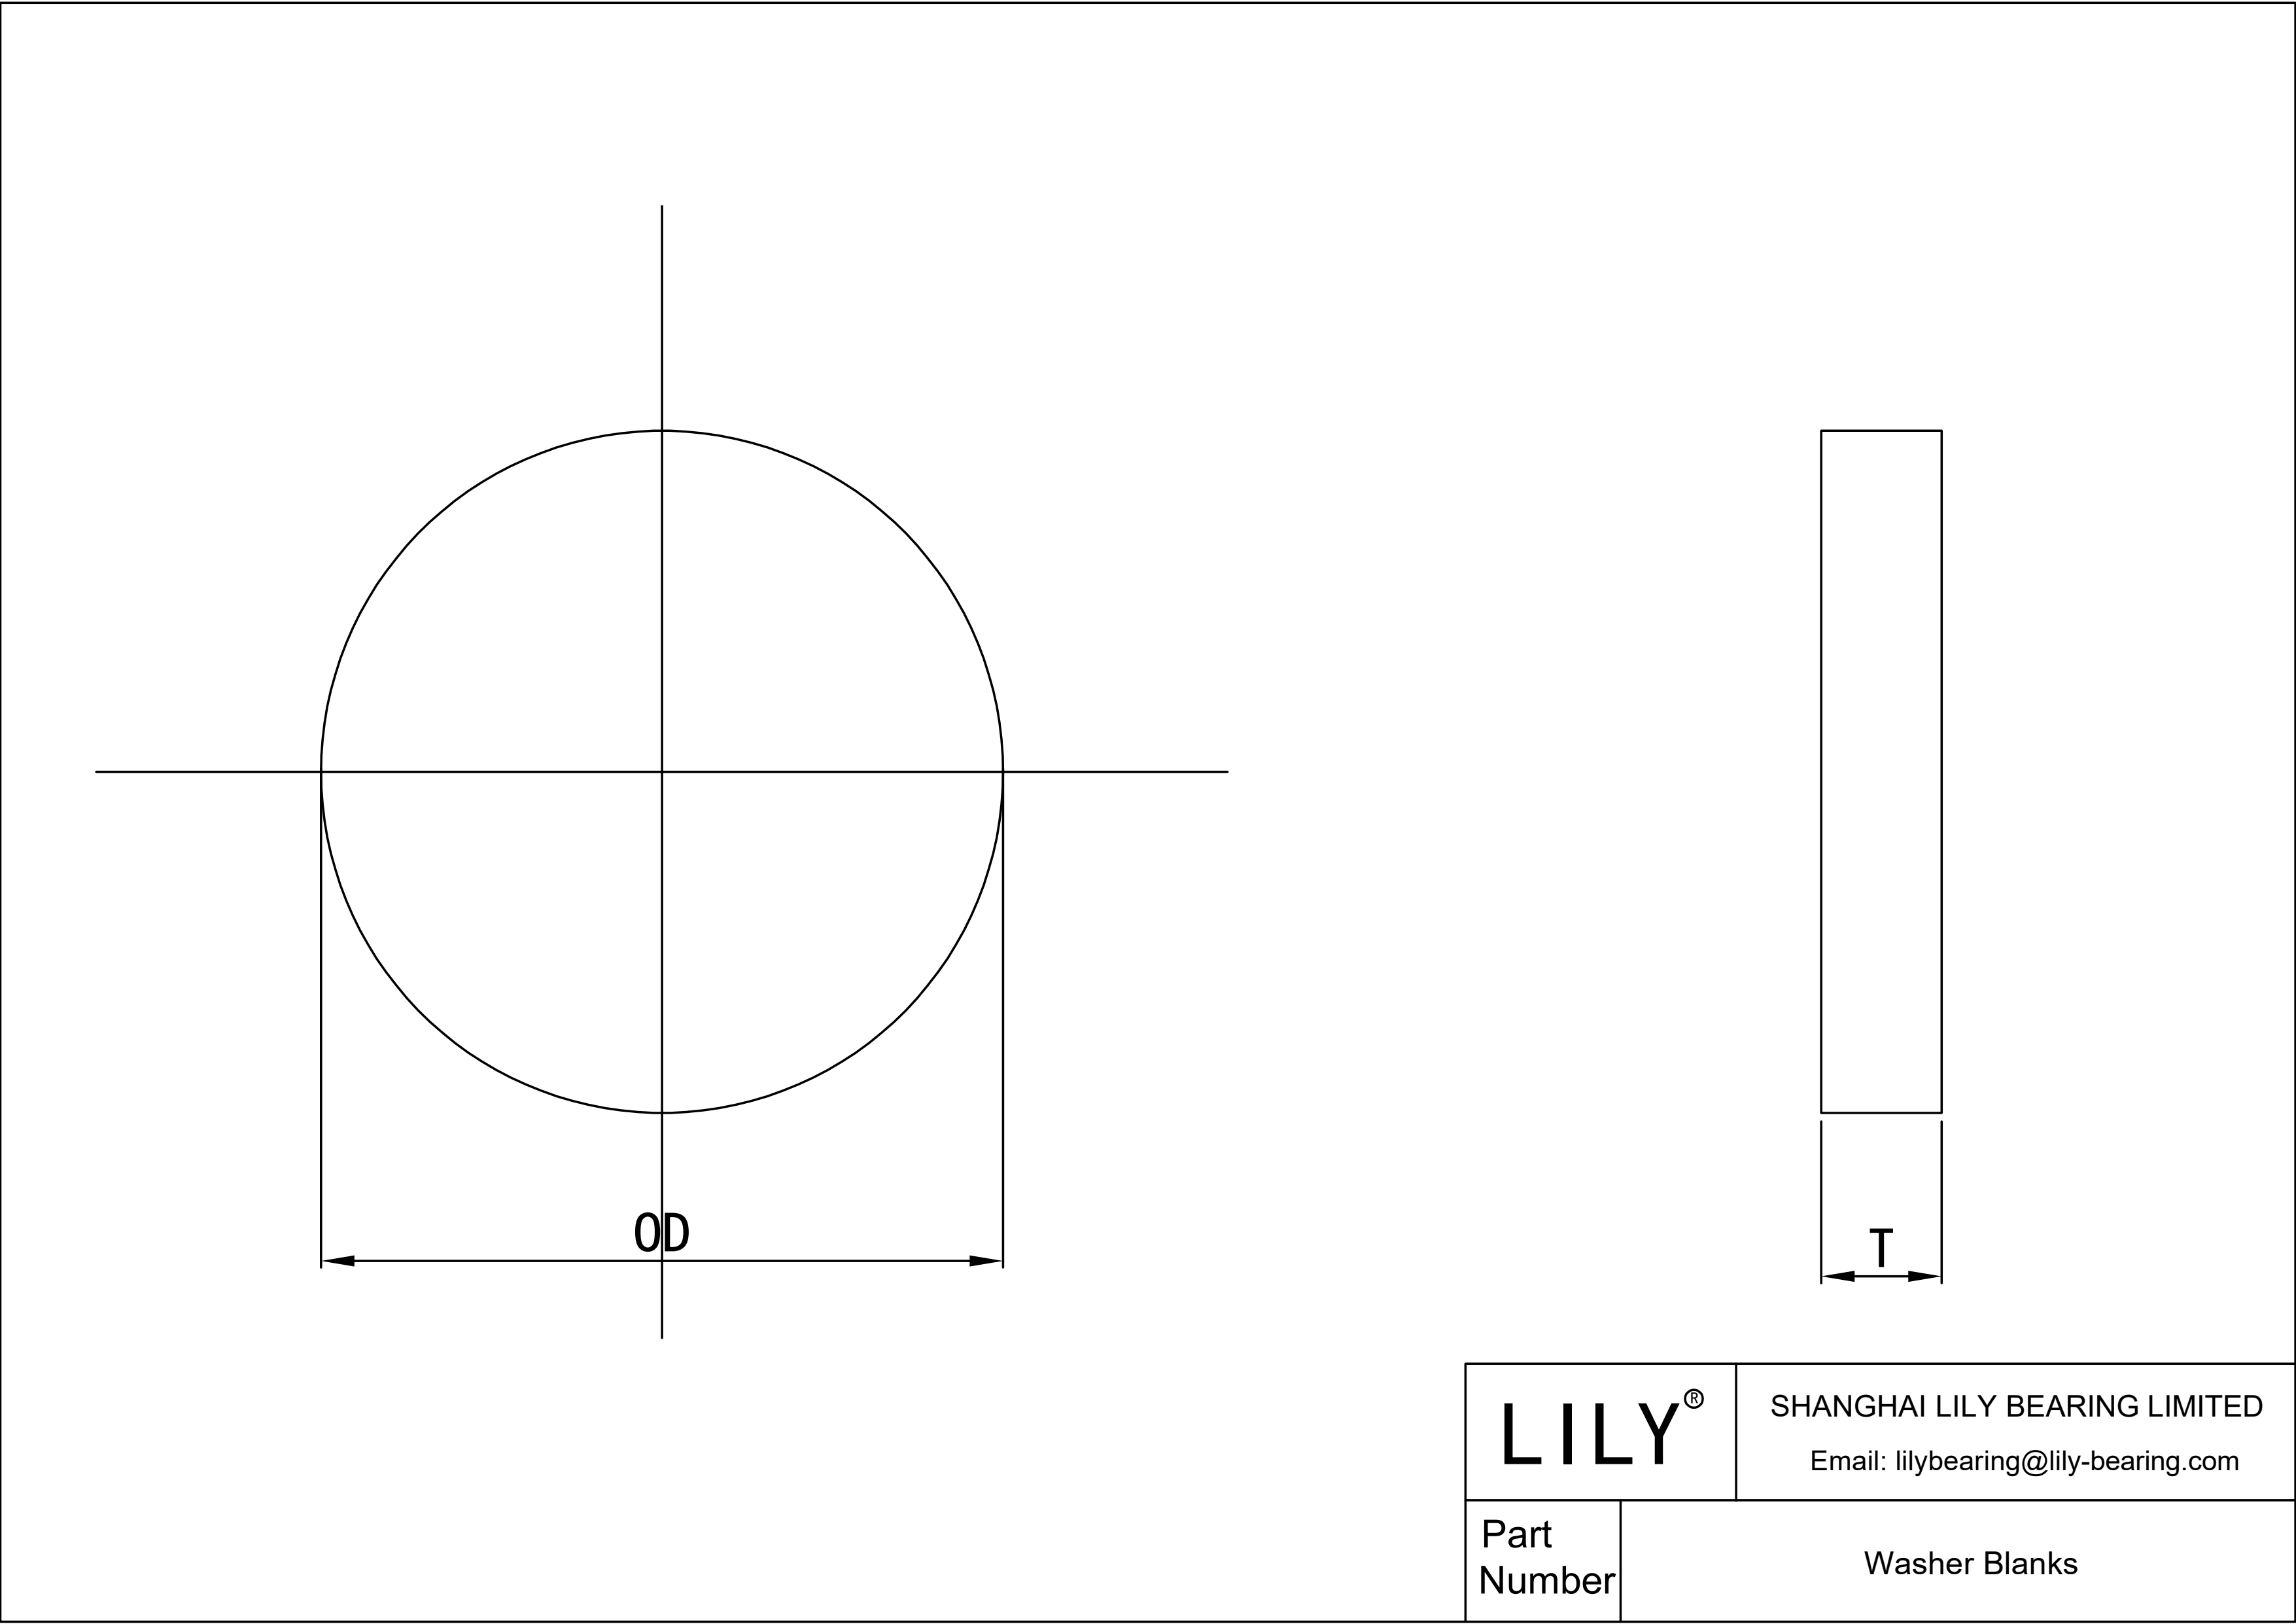 JDCHEAGIA Washer Blanks cad drawing